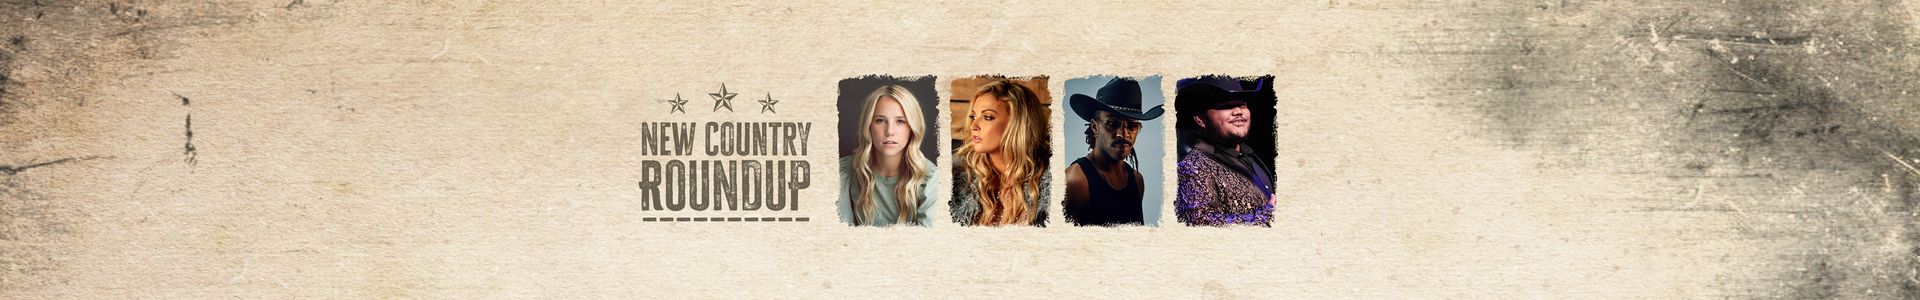 New Country Roundup